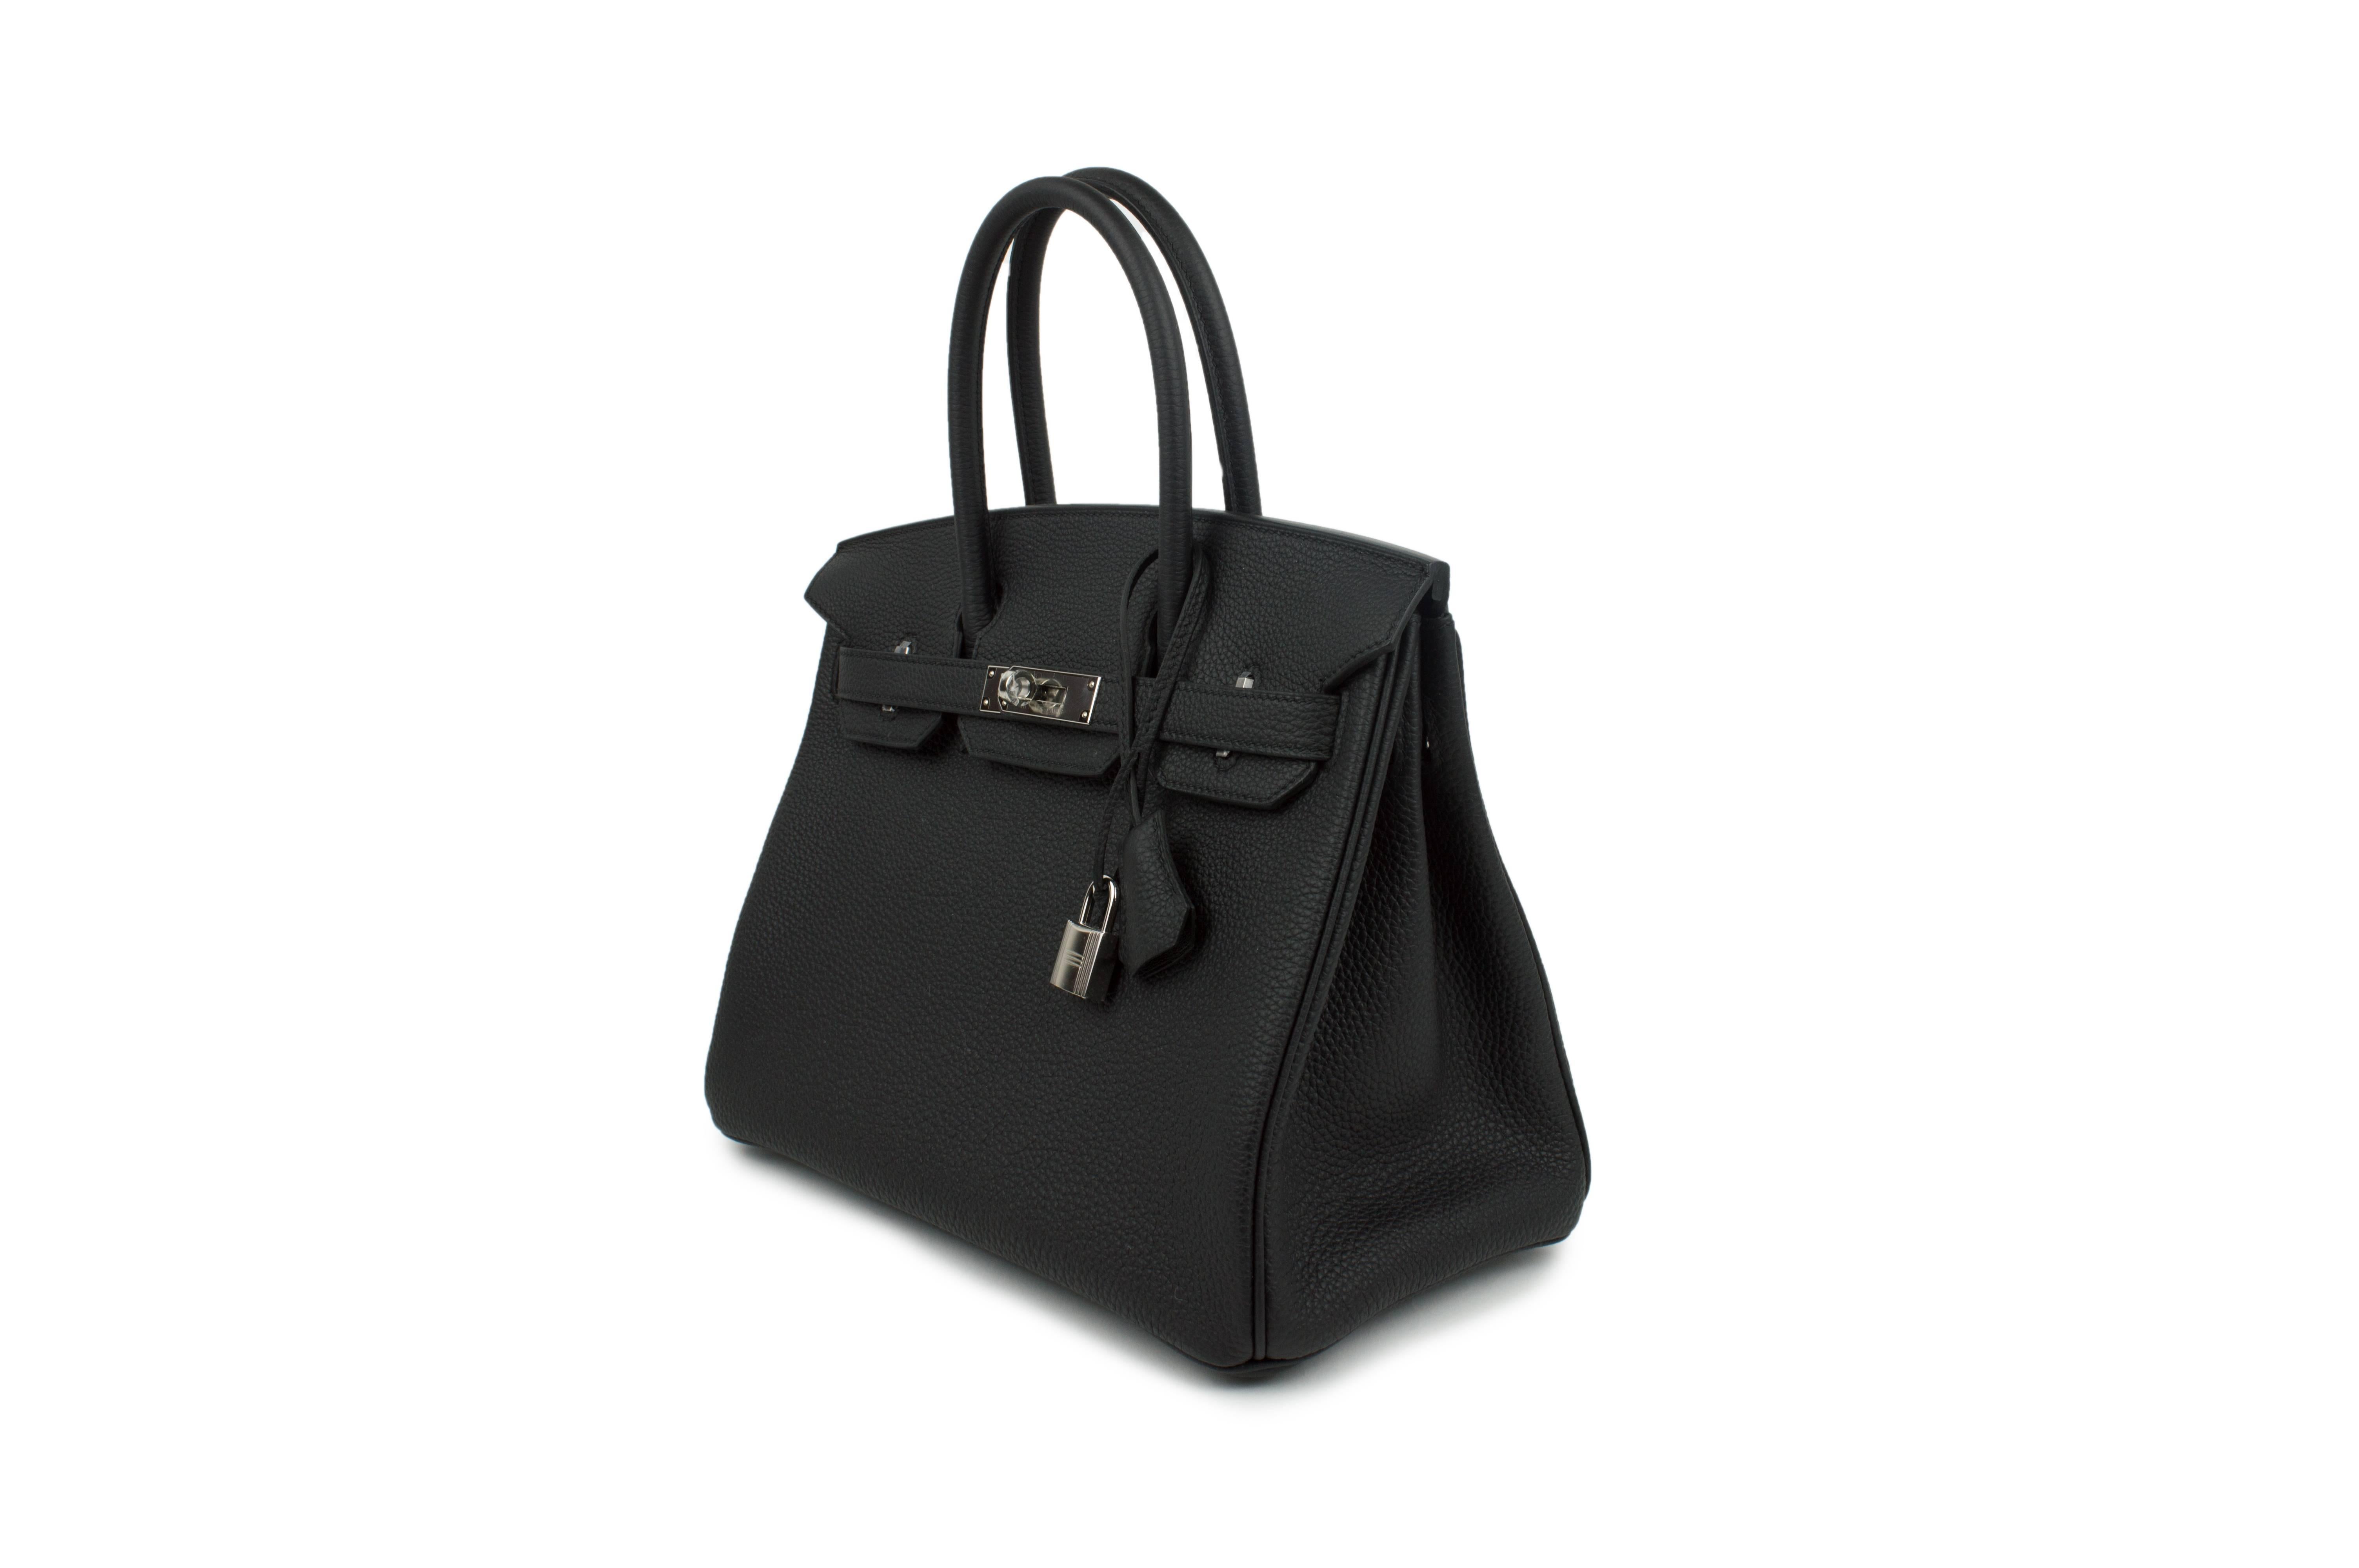 The new Hermès Birkin 30 cm Noir bag is a real masterpiece of the fashion industry. It is made of high quality leather and trimmed with silver accessories. Such handbag is a positional good emphasizing the irreproachable sense of style of its owner,